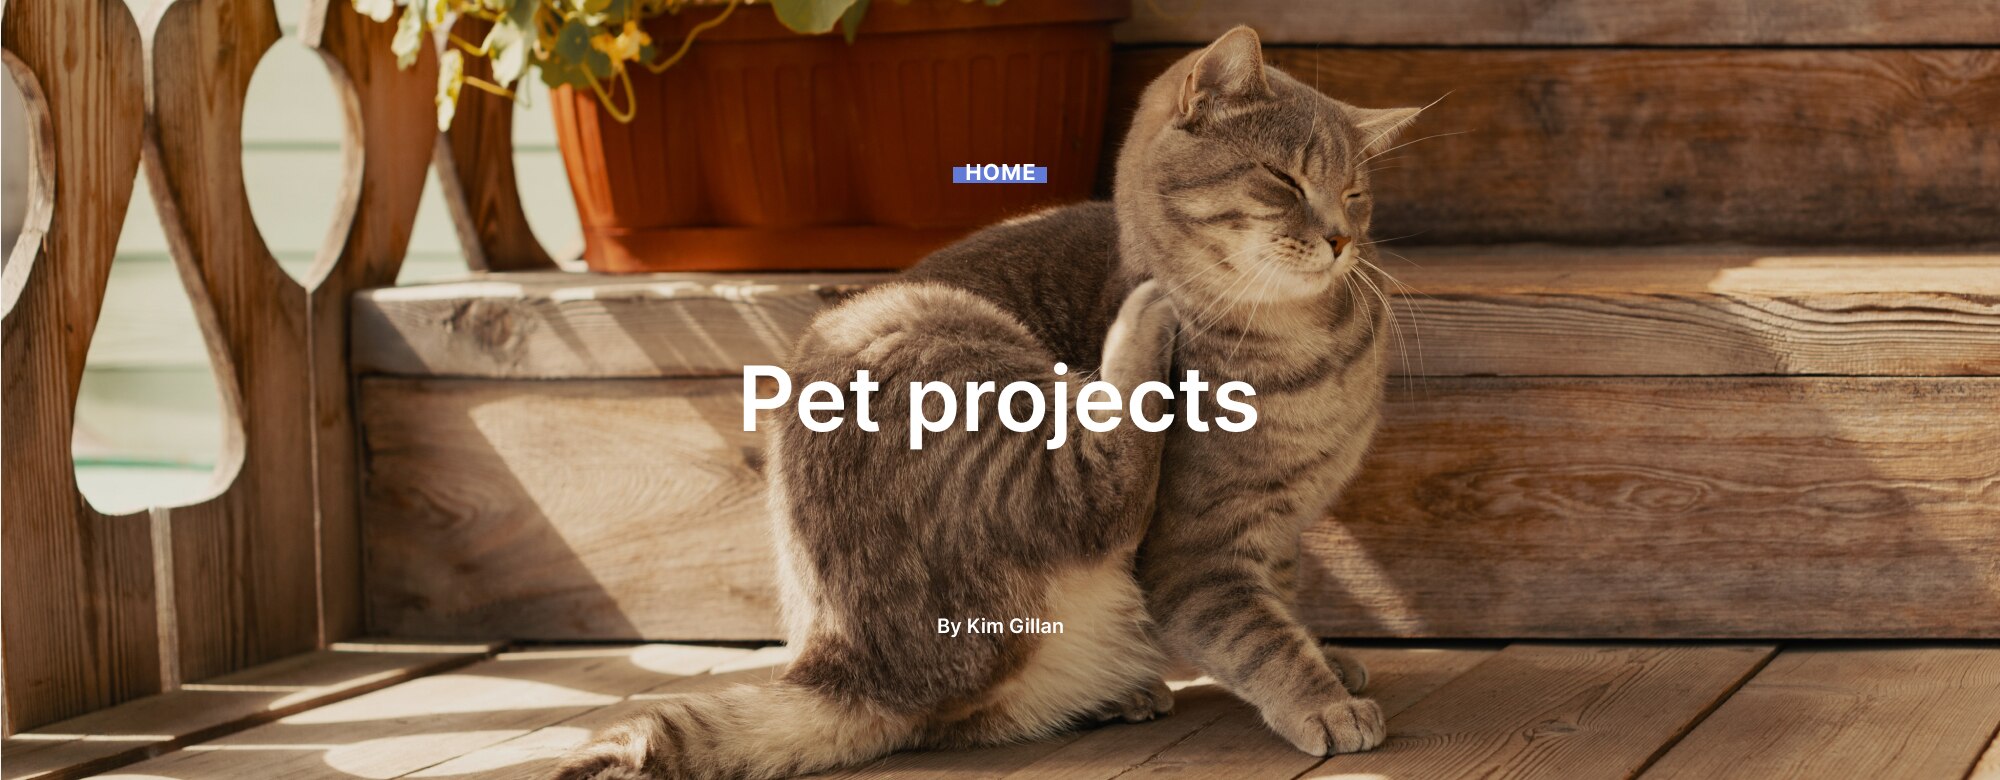 Pet projects